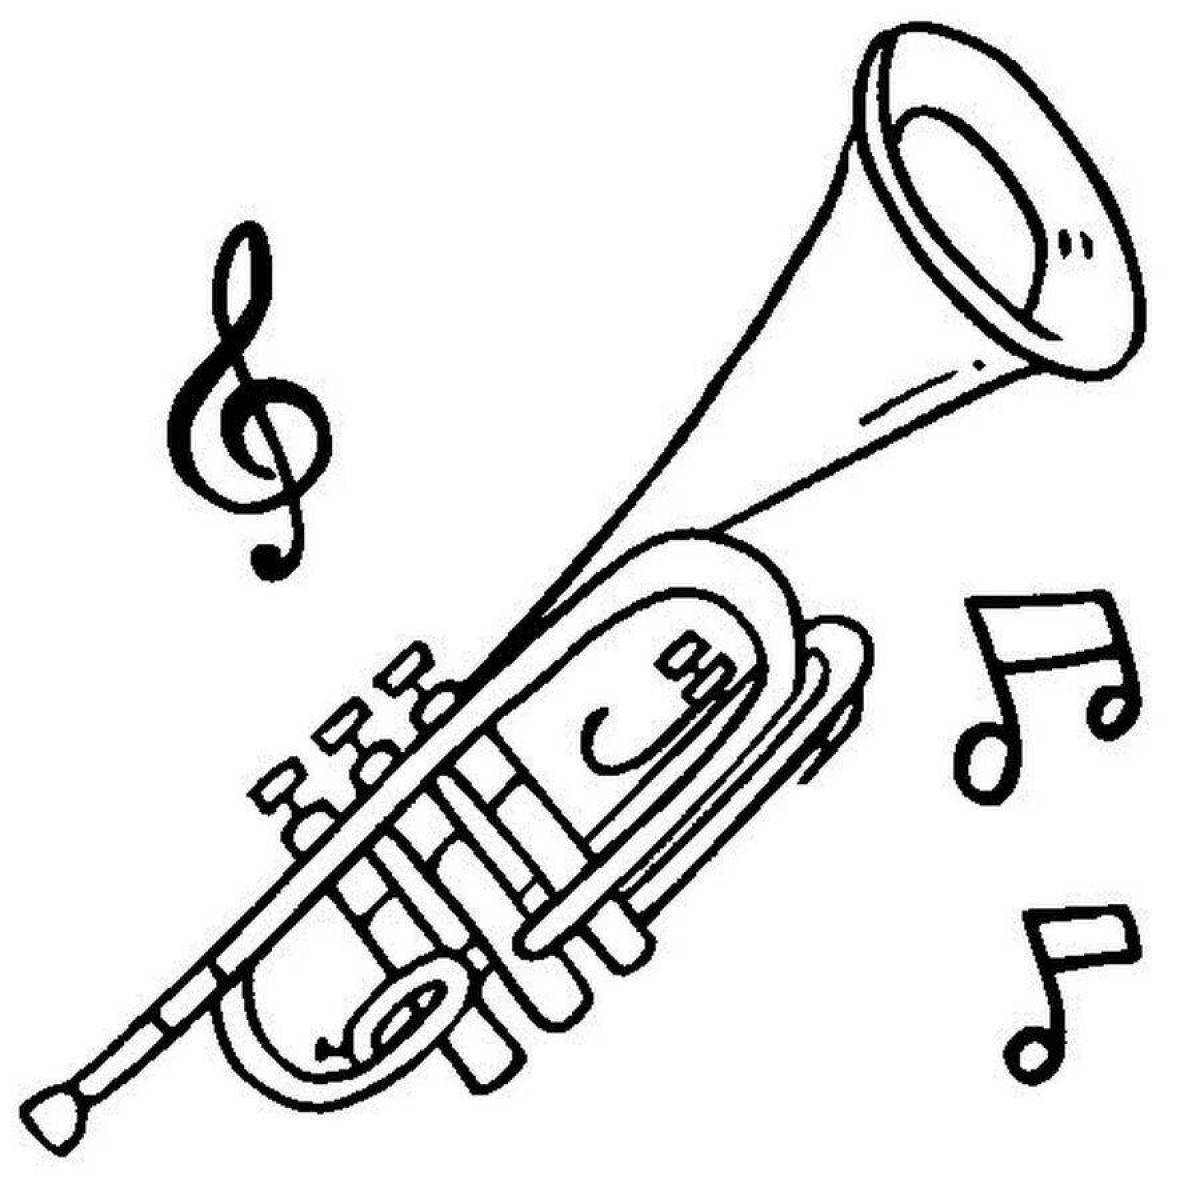 Amazing wind instruments coloring page